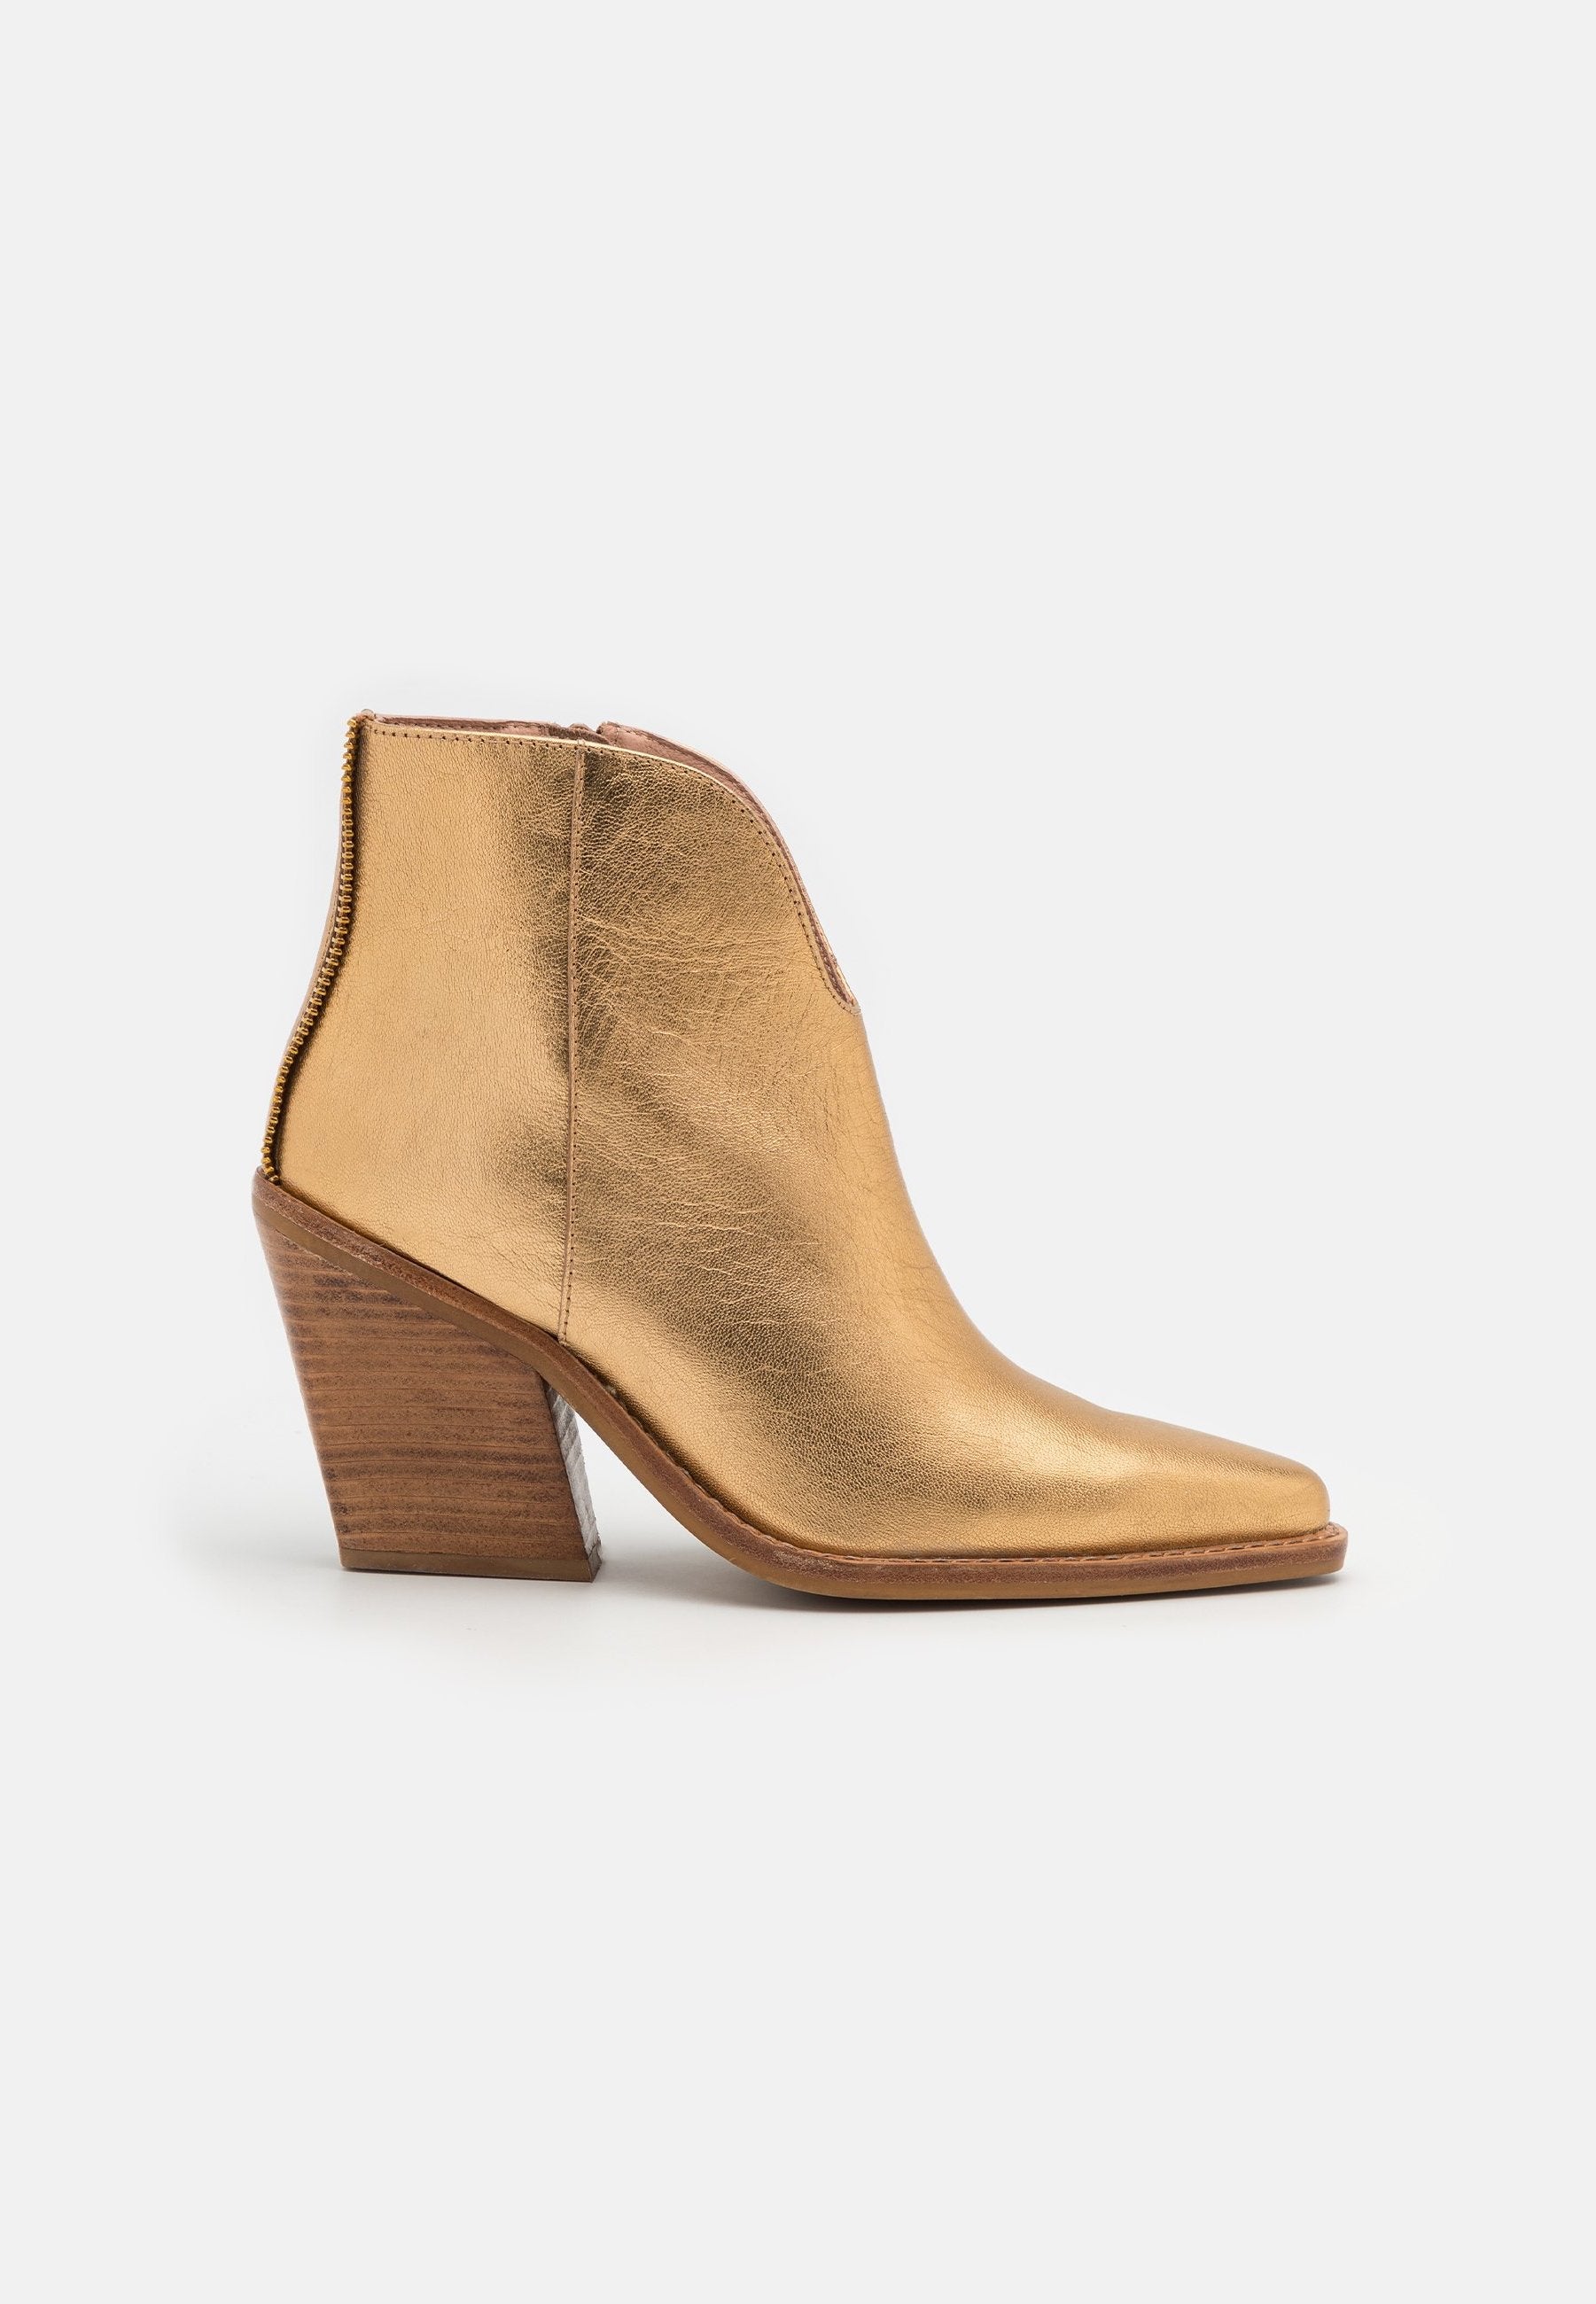 New Kole Gold Low Ankle Boots 34265-M-103 - 7